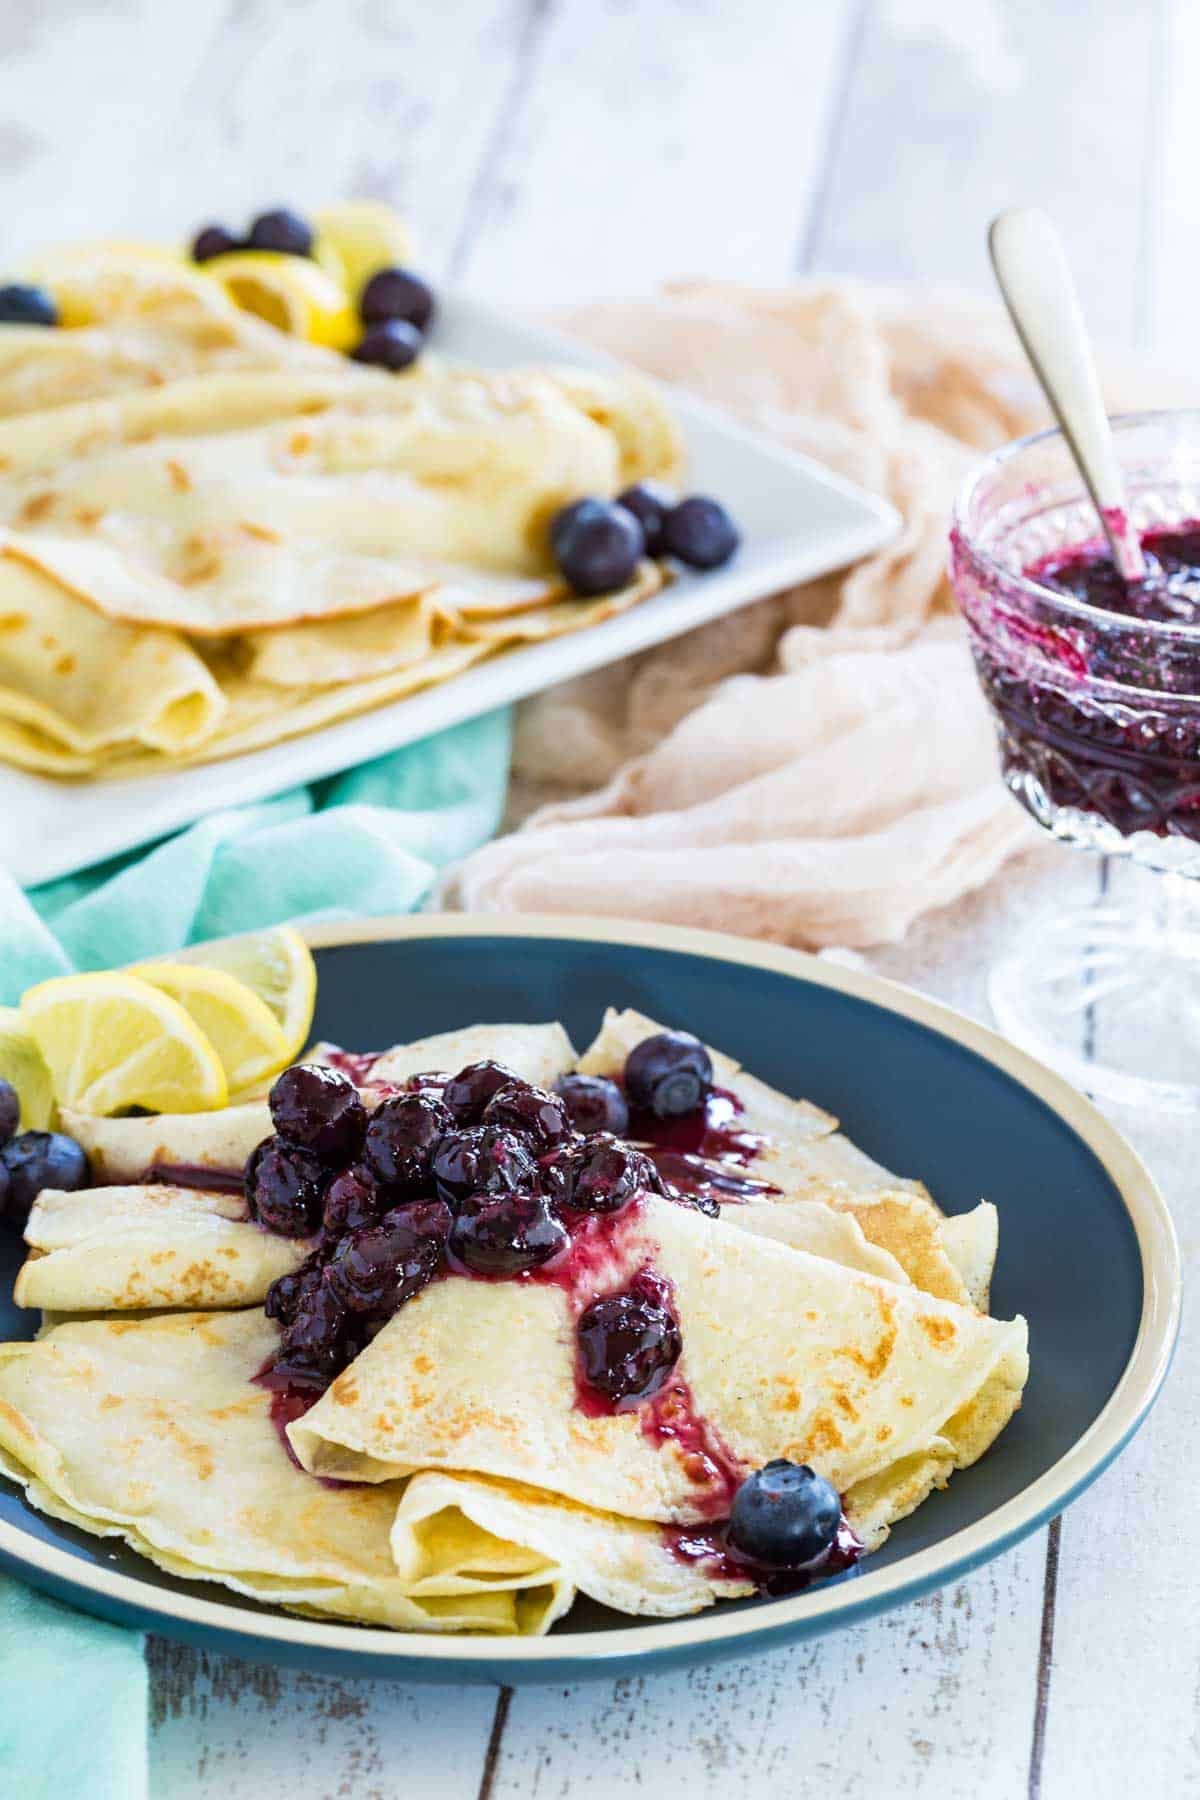 Gluten-free blueberry crepes on a plate with blueberry sauce and more crepes behind them